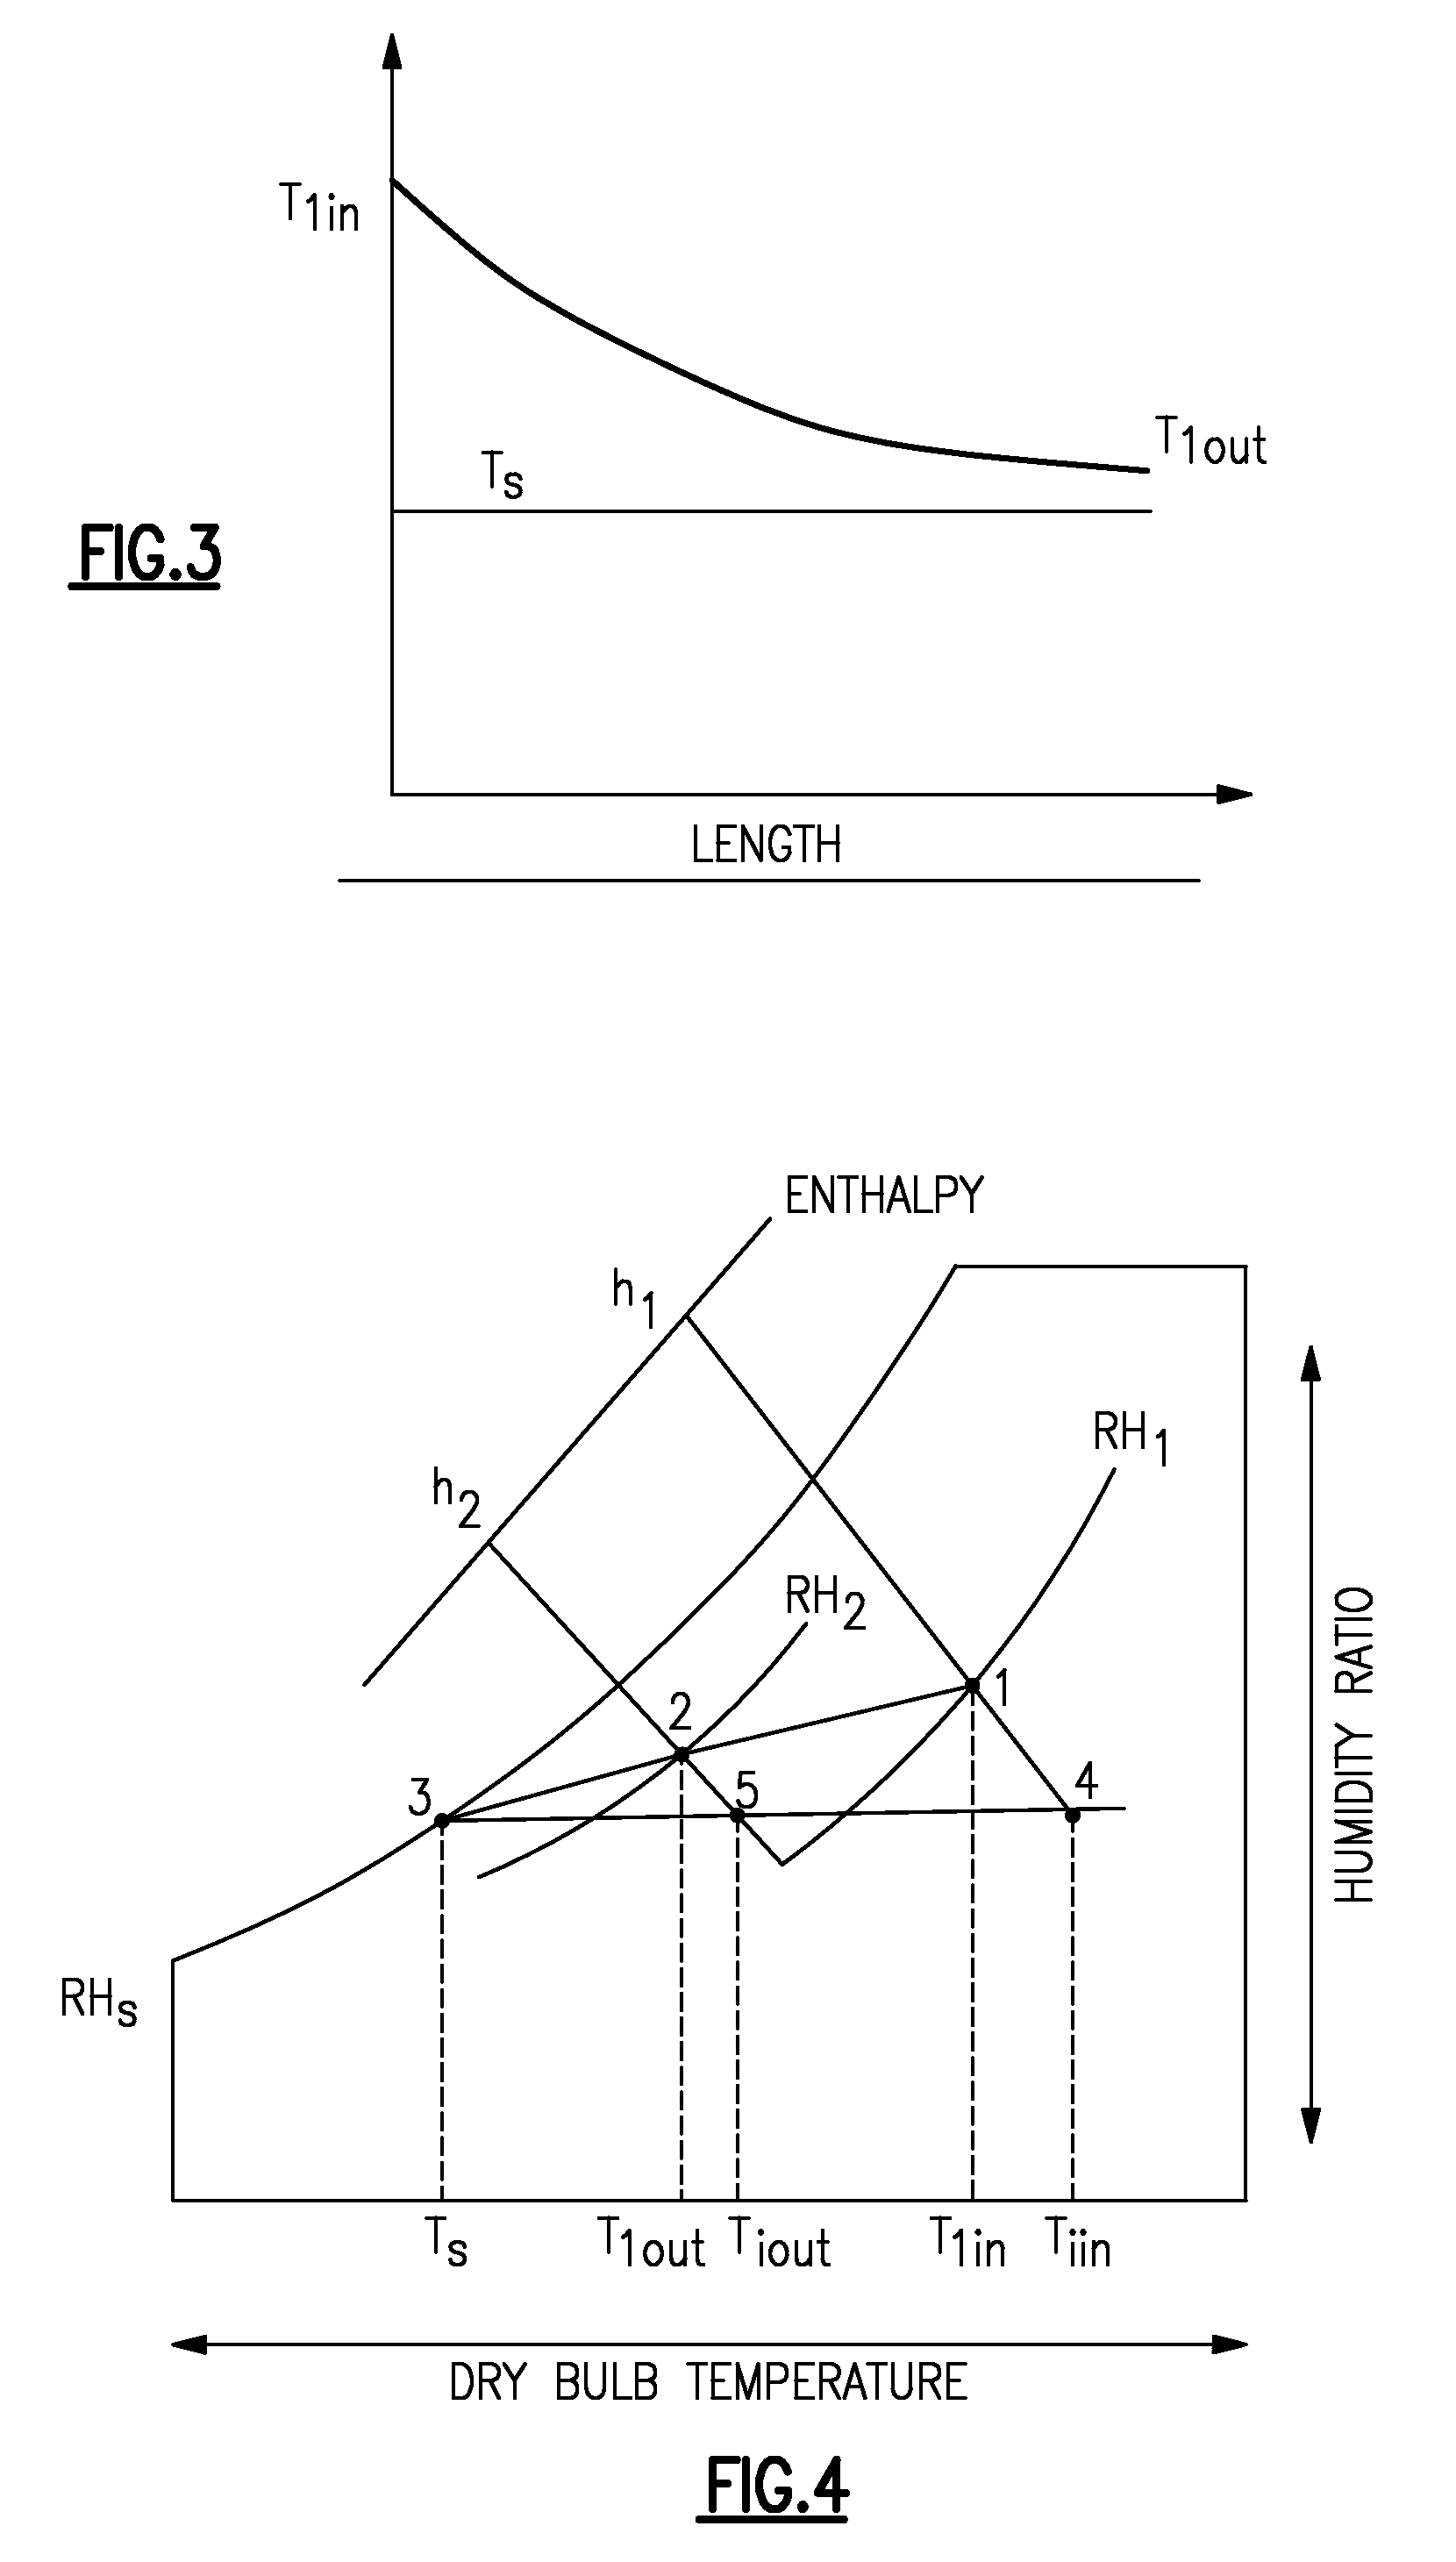 Method for detecting a fault in an HVAC system